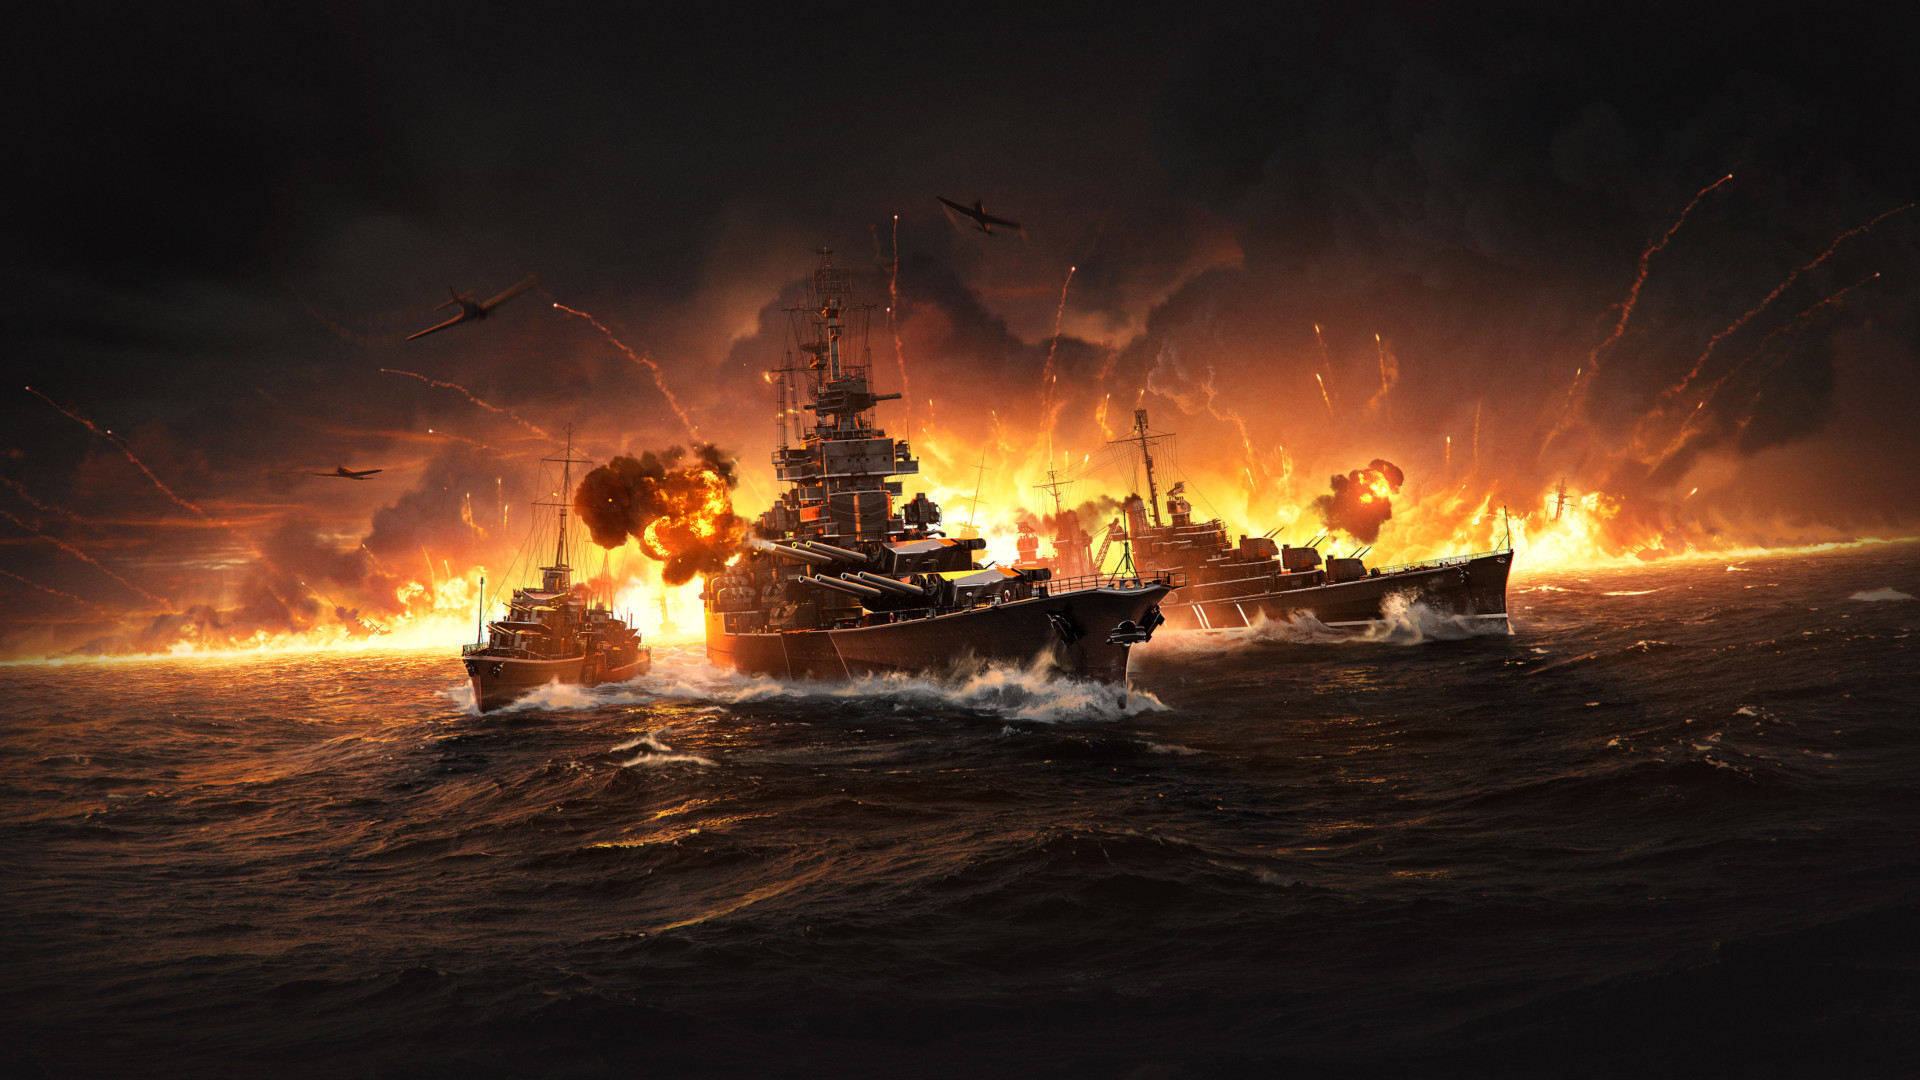 Best world war 2 games: Three large ships explode into flames in the middle of the ocean in World of Warships